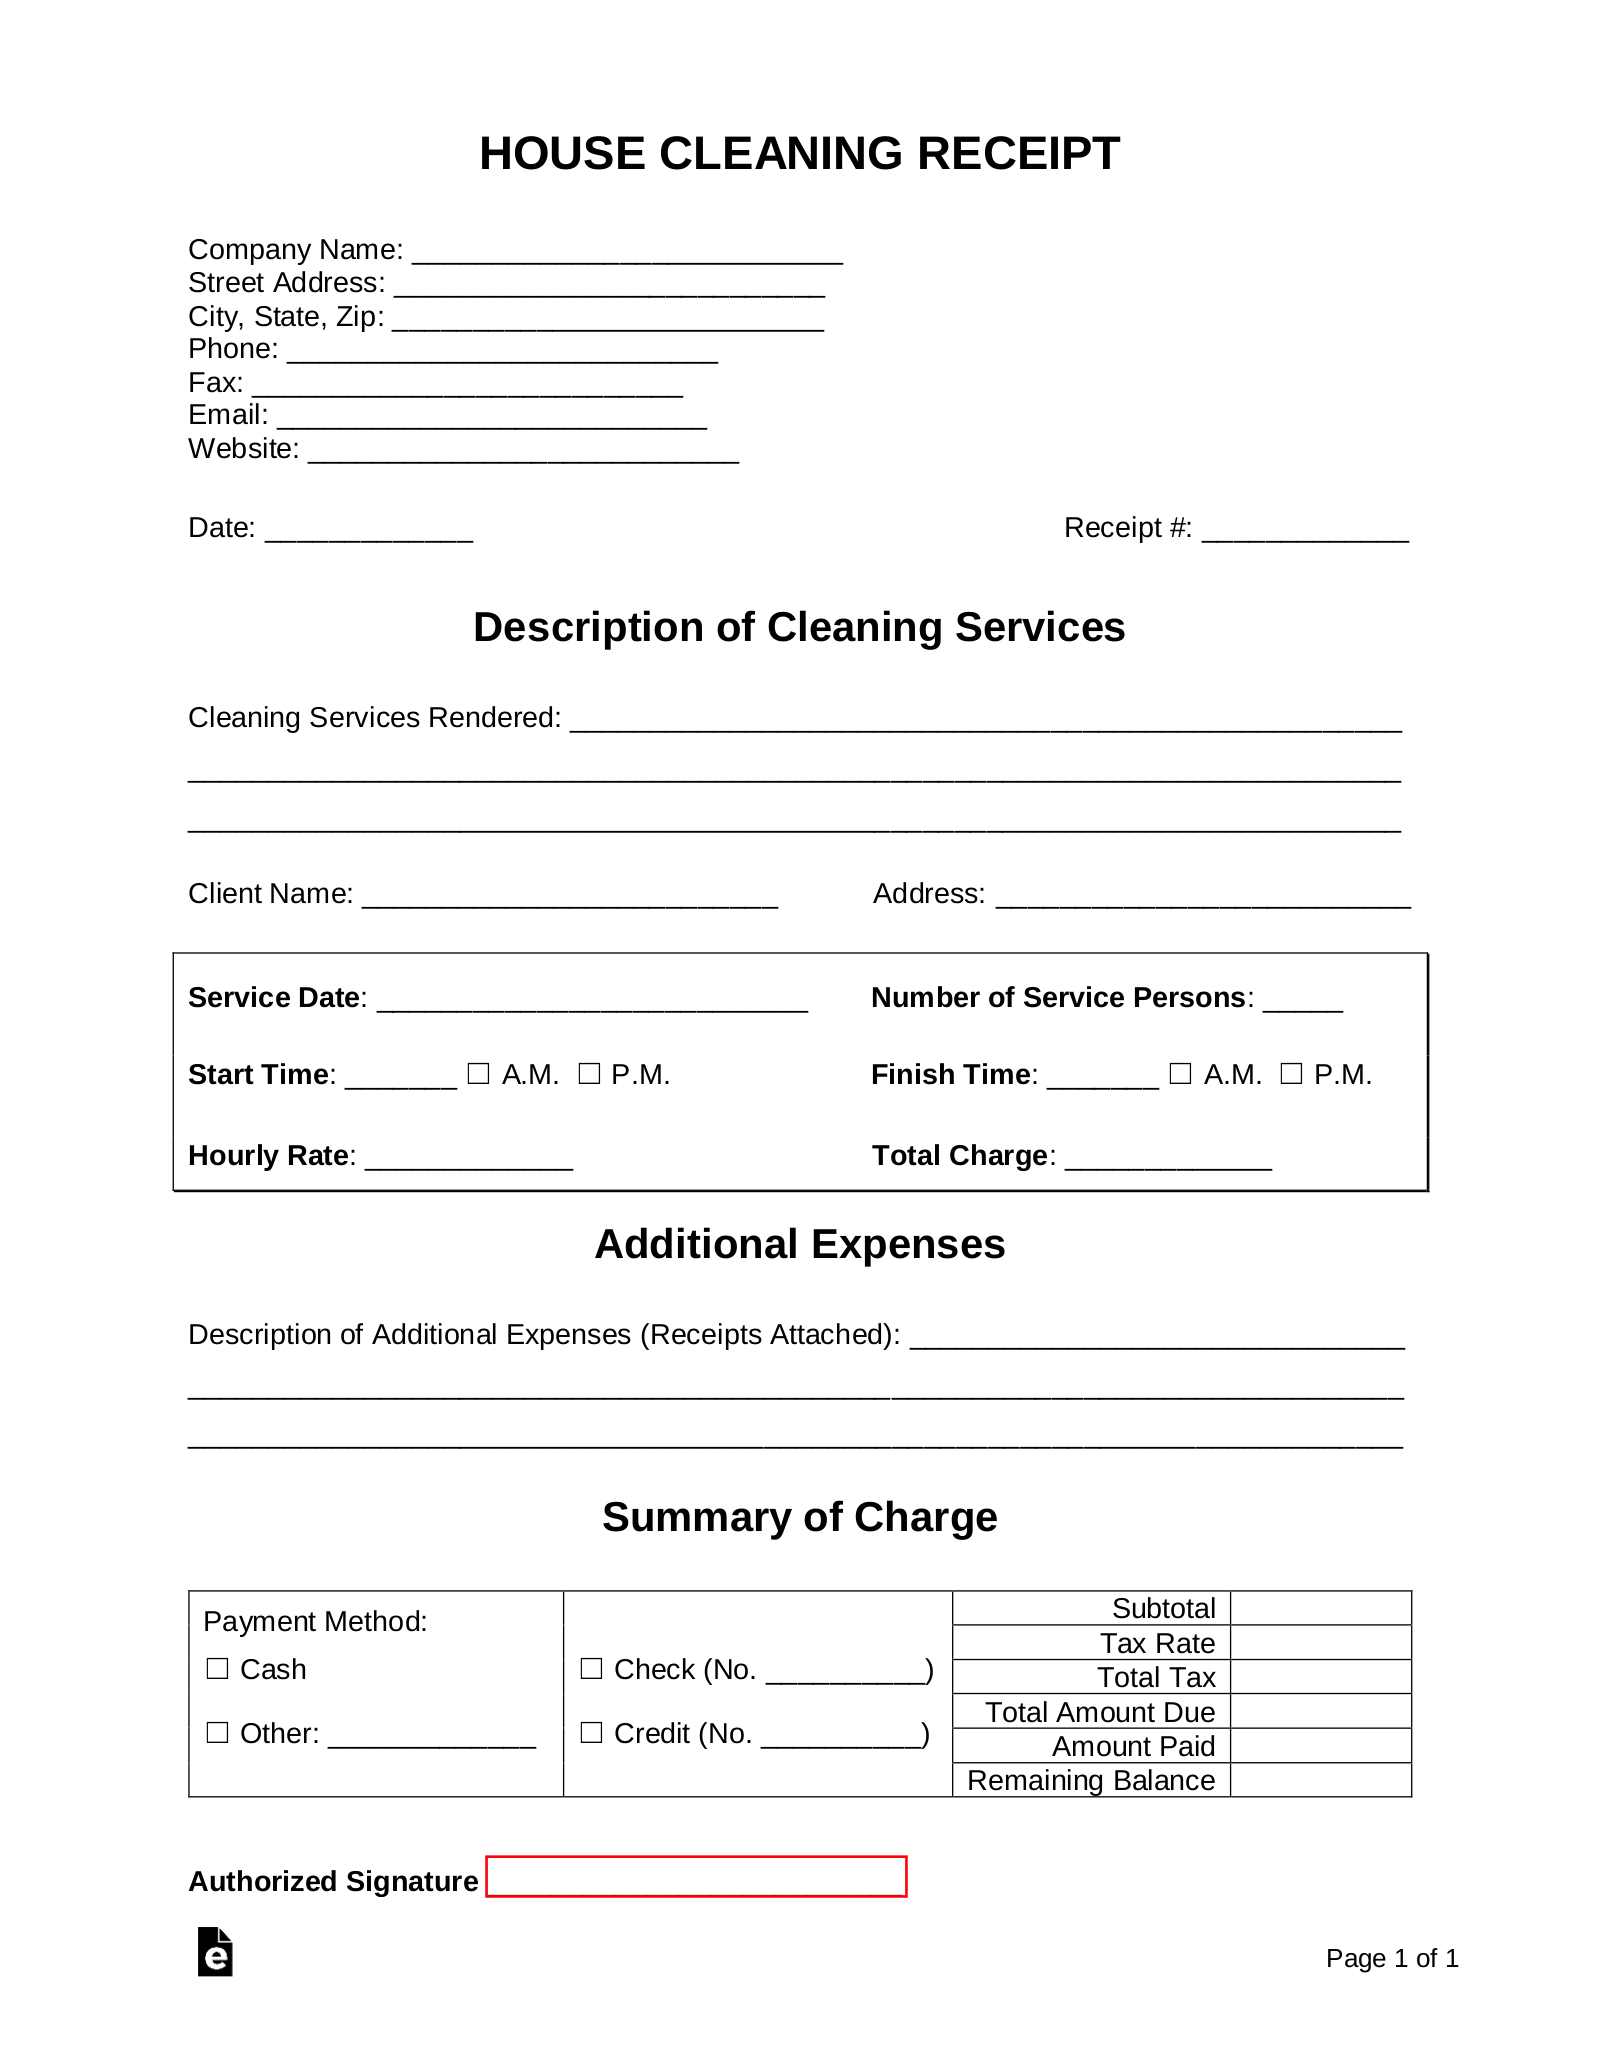 free-house-cleaning-housekeeping-receipt-template-pdf-word-eforms